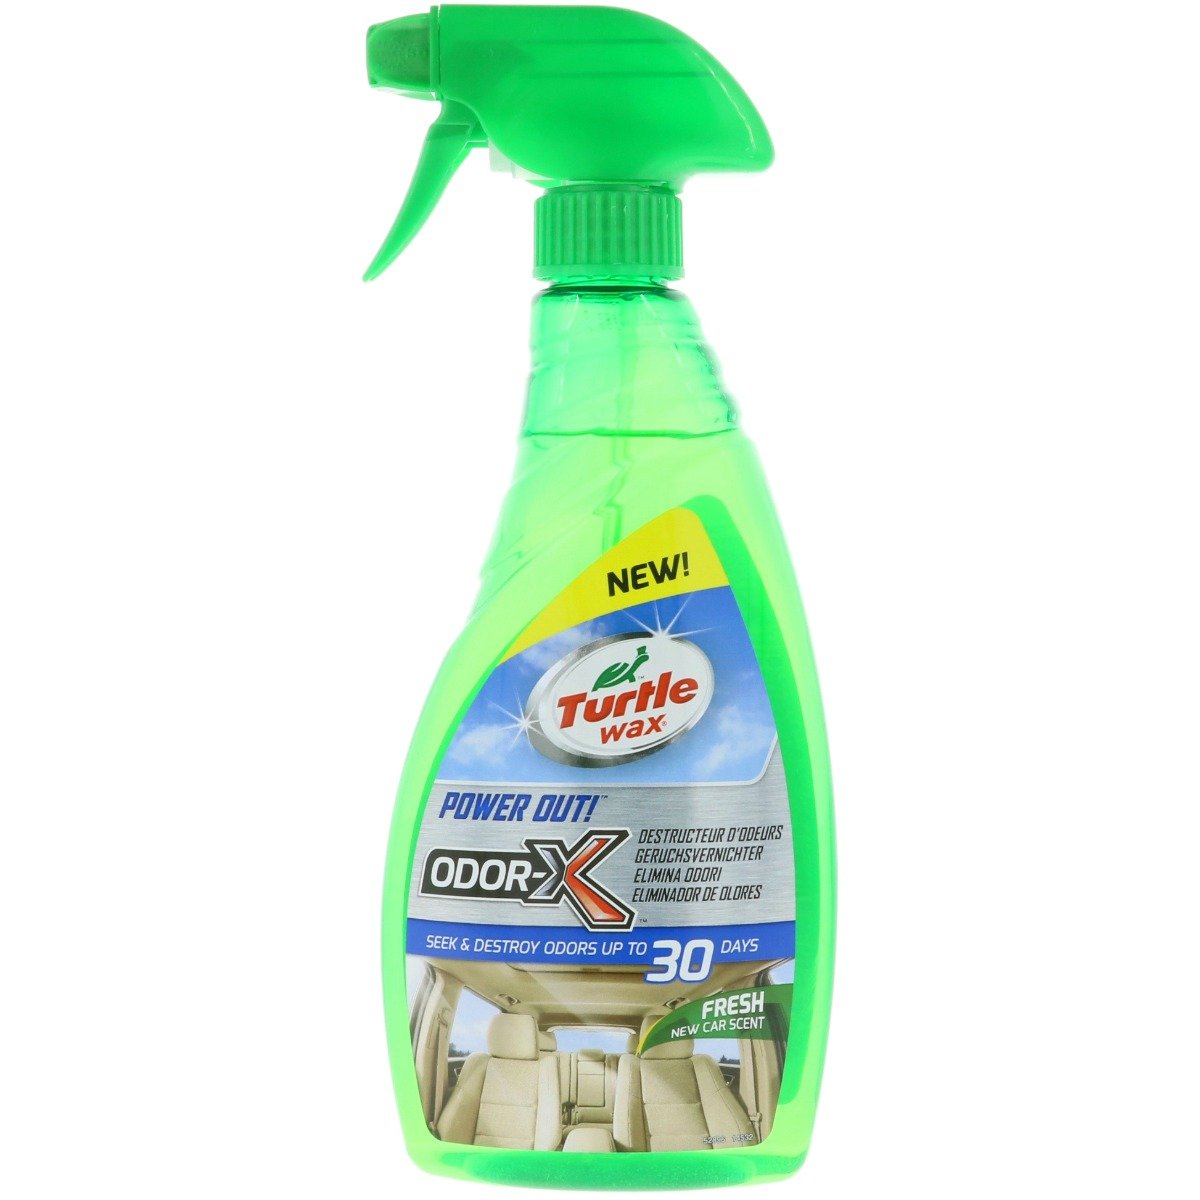 Power Out! Odor-X - 500ml